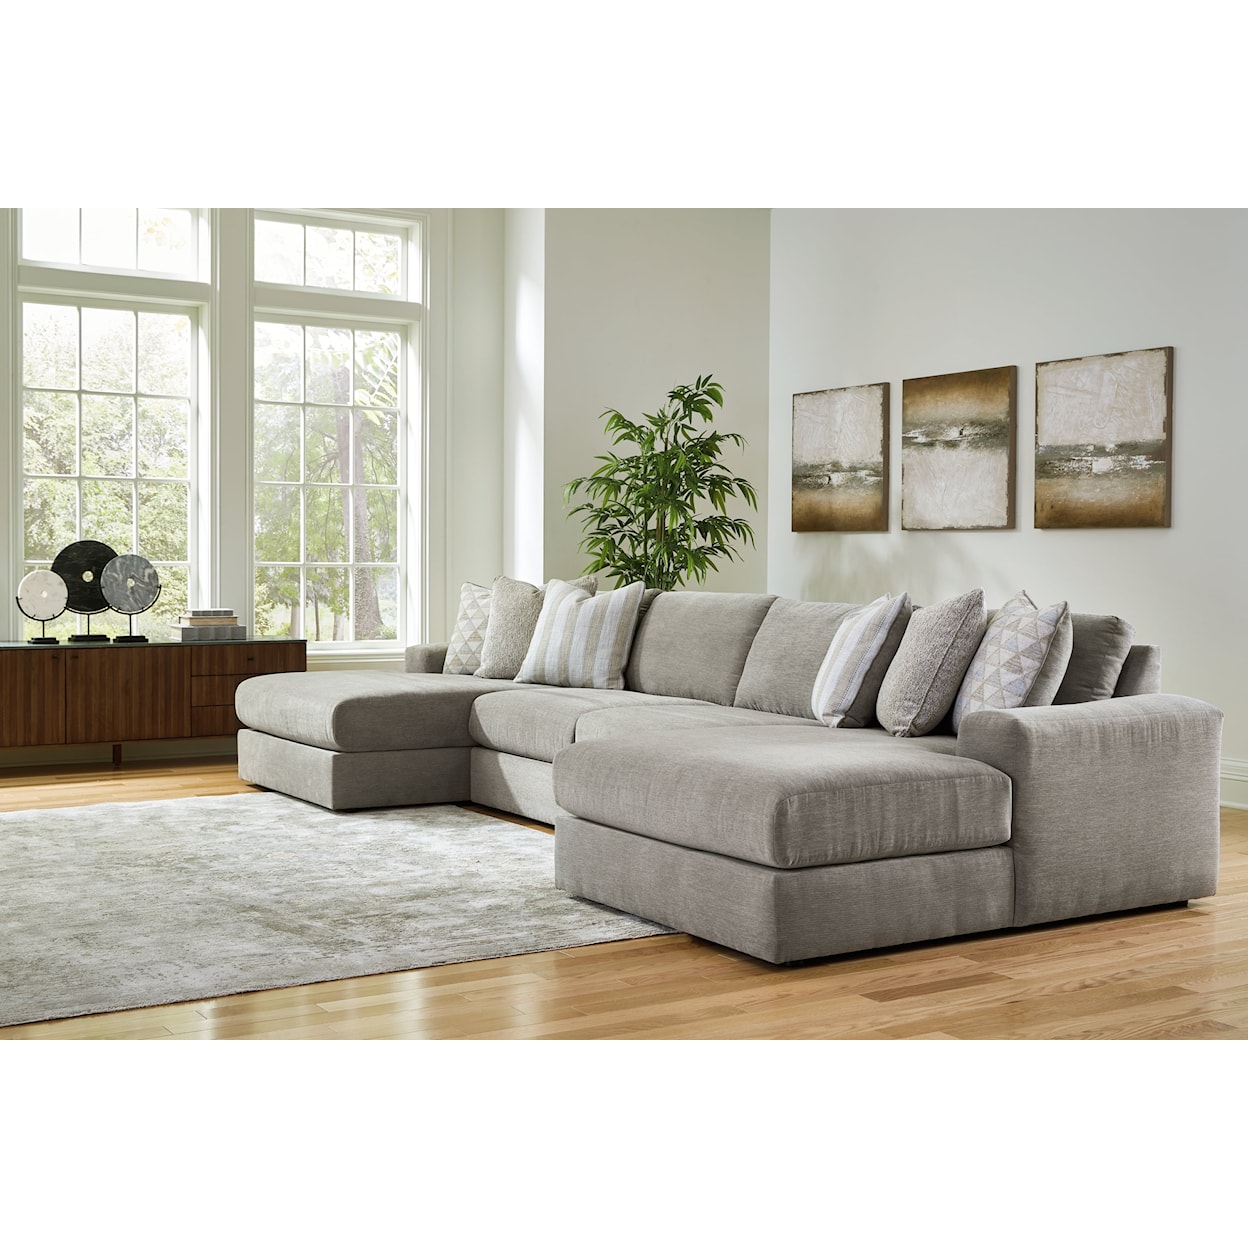 Signature Design by Ashley Furniture Avaliyah 4-Piece Double Chaise Sectional